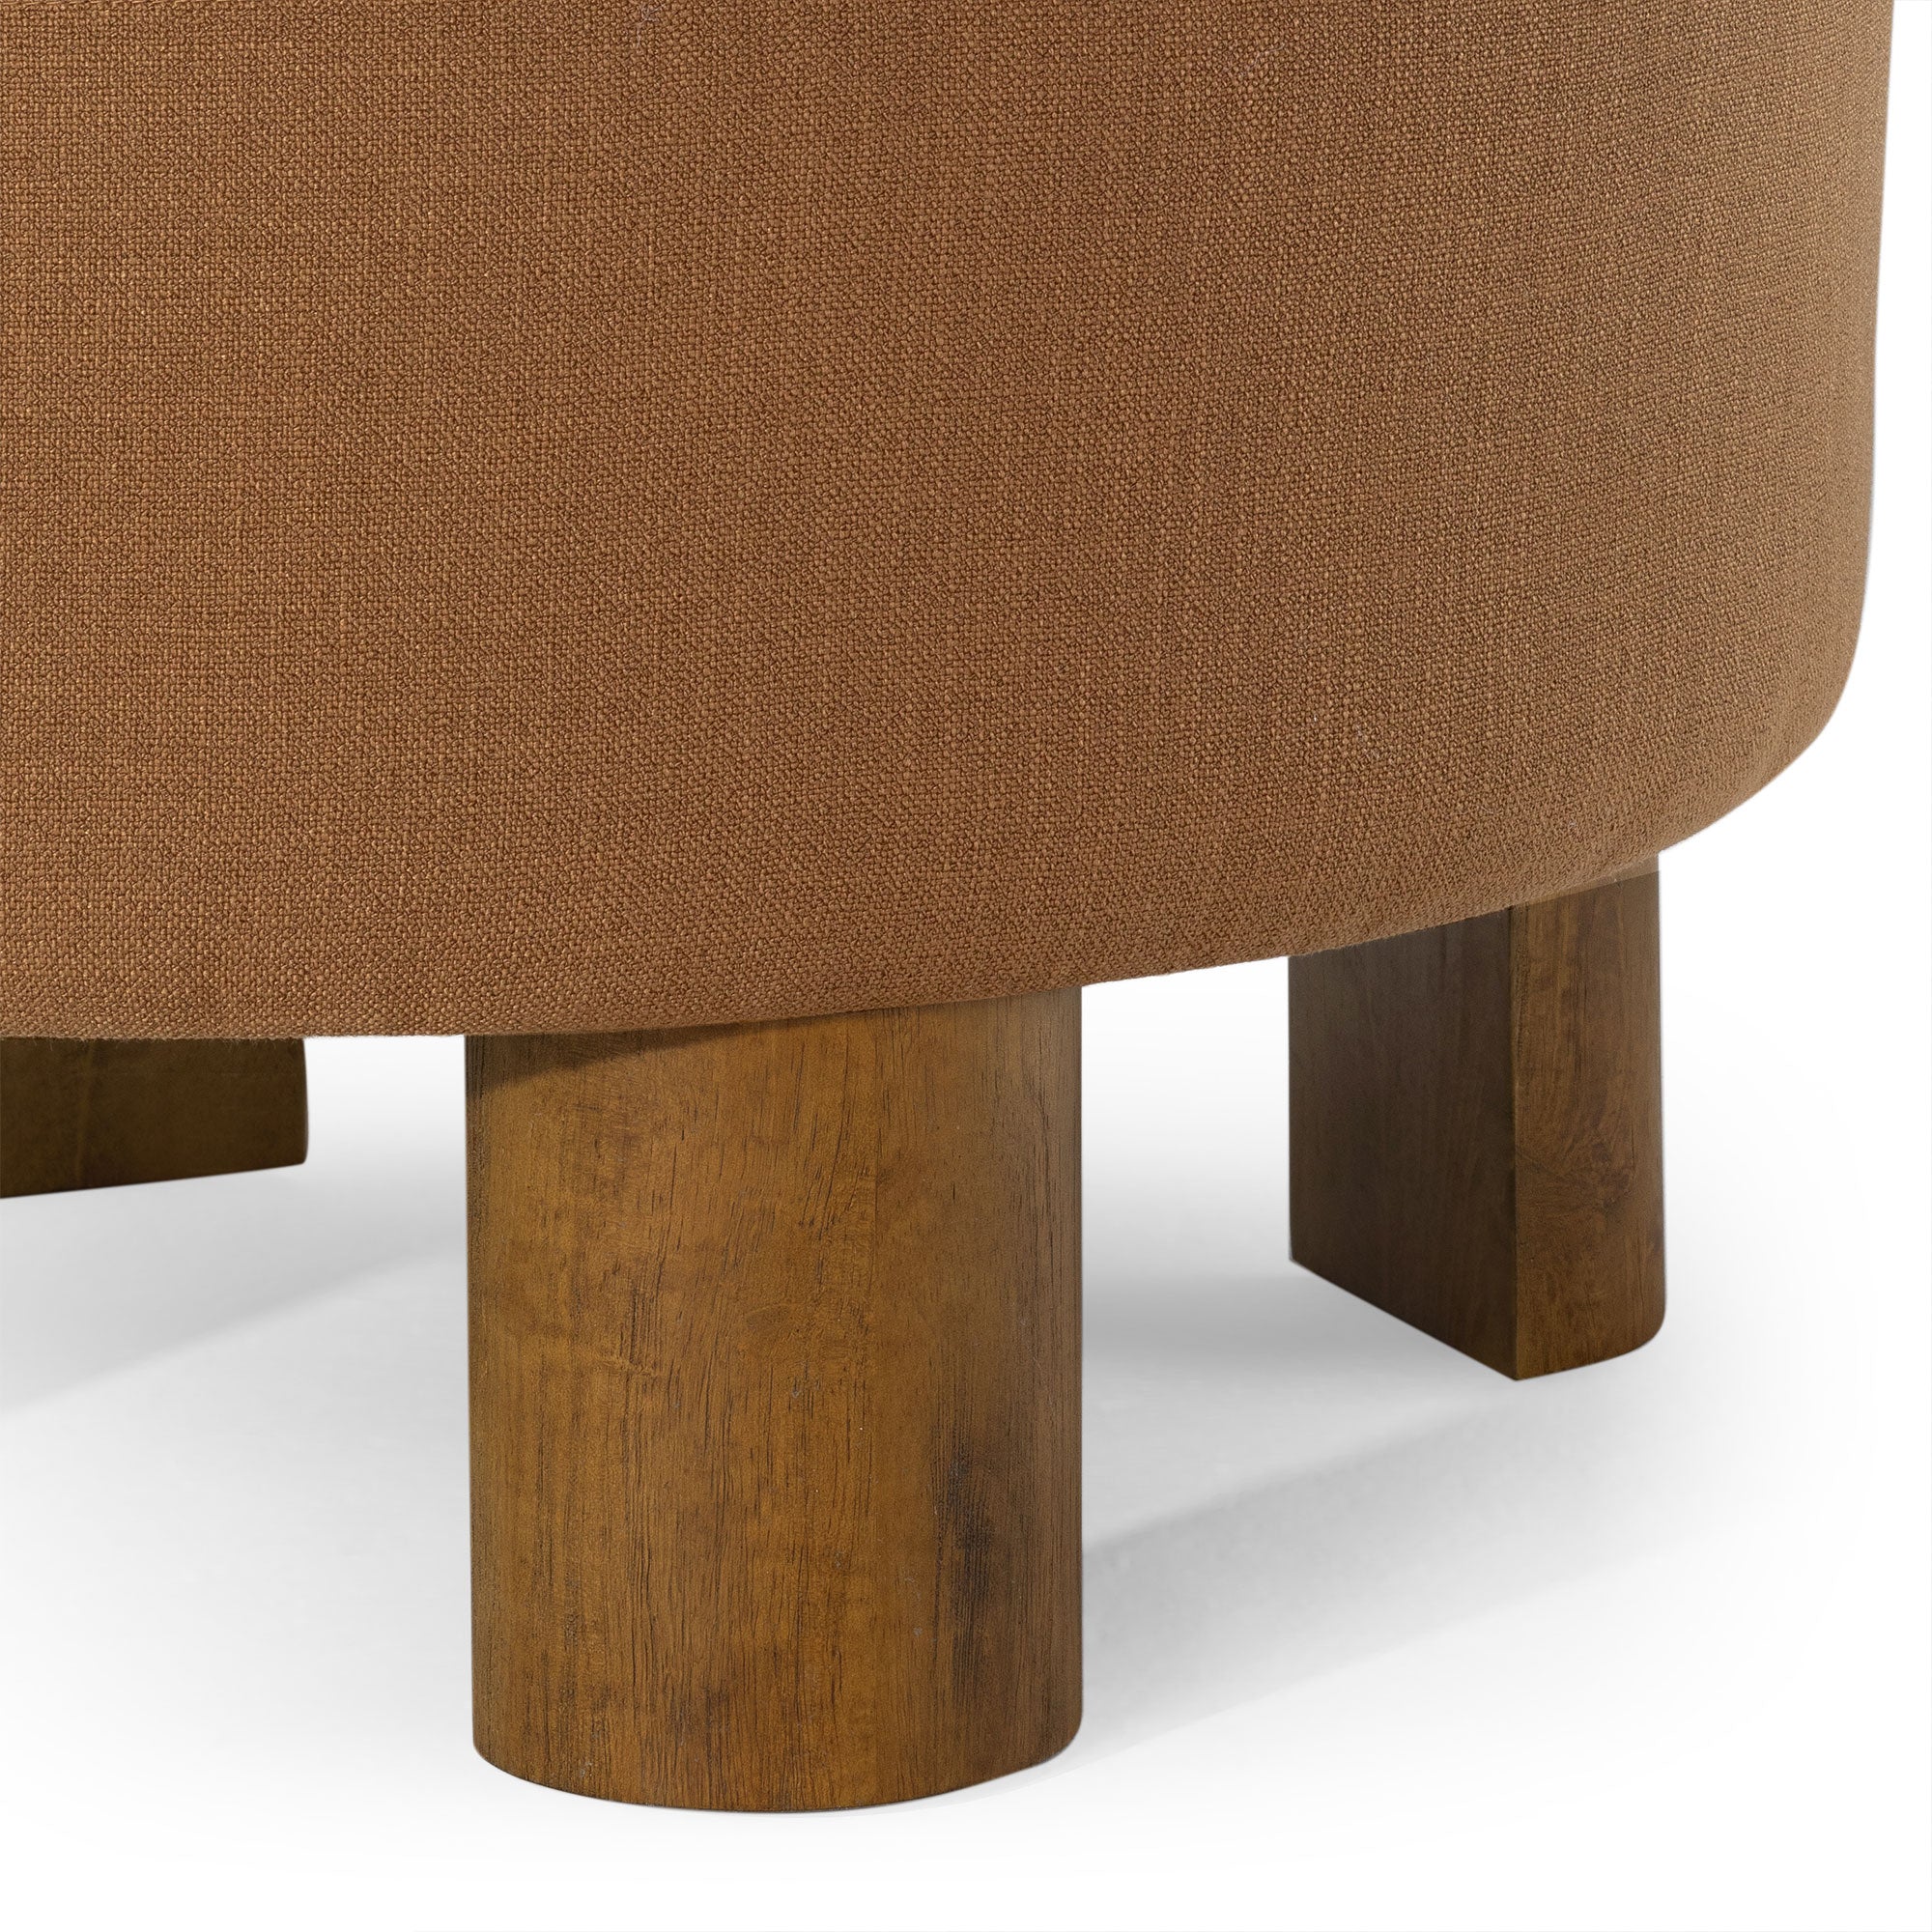 Celia Contemporary Upholstered Ottoman with Refined Brown Wood Finish in Ottomans & Benches by Maven Lane